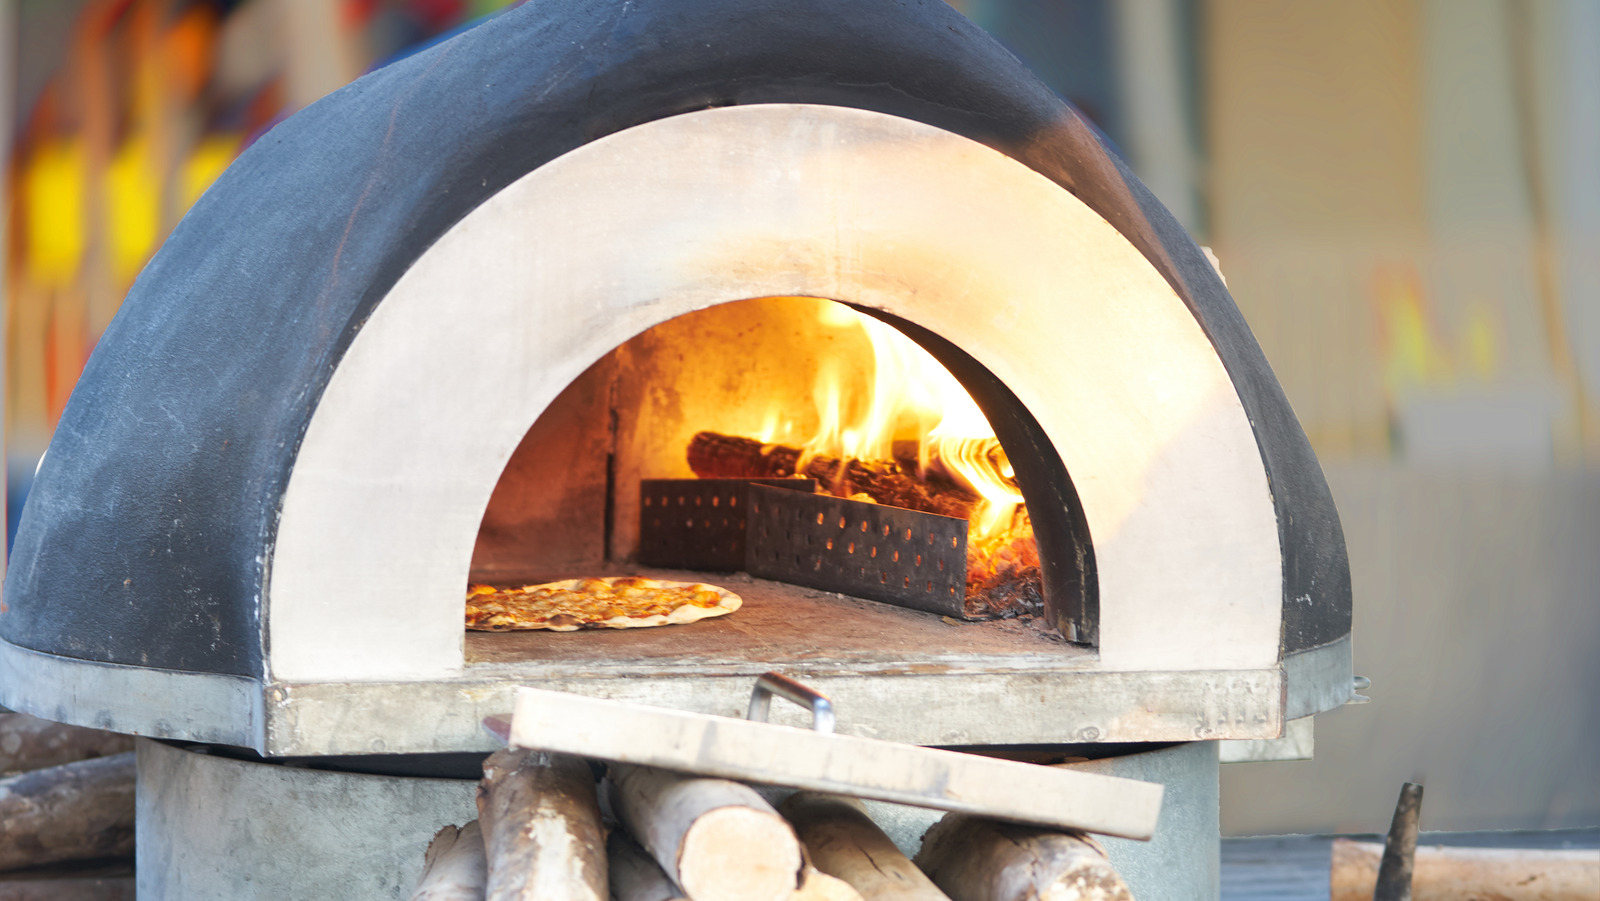 https://www.tastingtable.com/img/gallery/best-uses-for-your-outdoor-pizza-oven/l-intro-1663251533.jpg